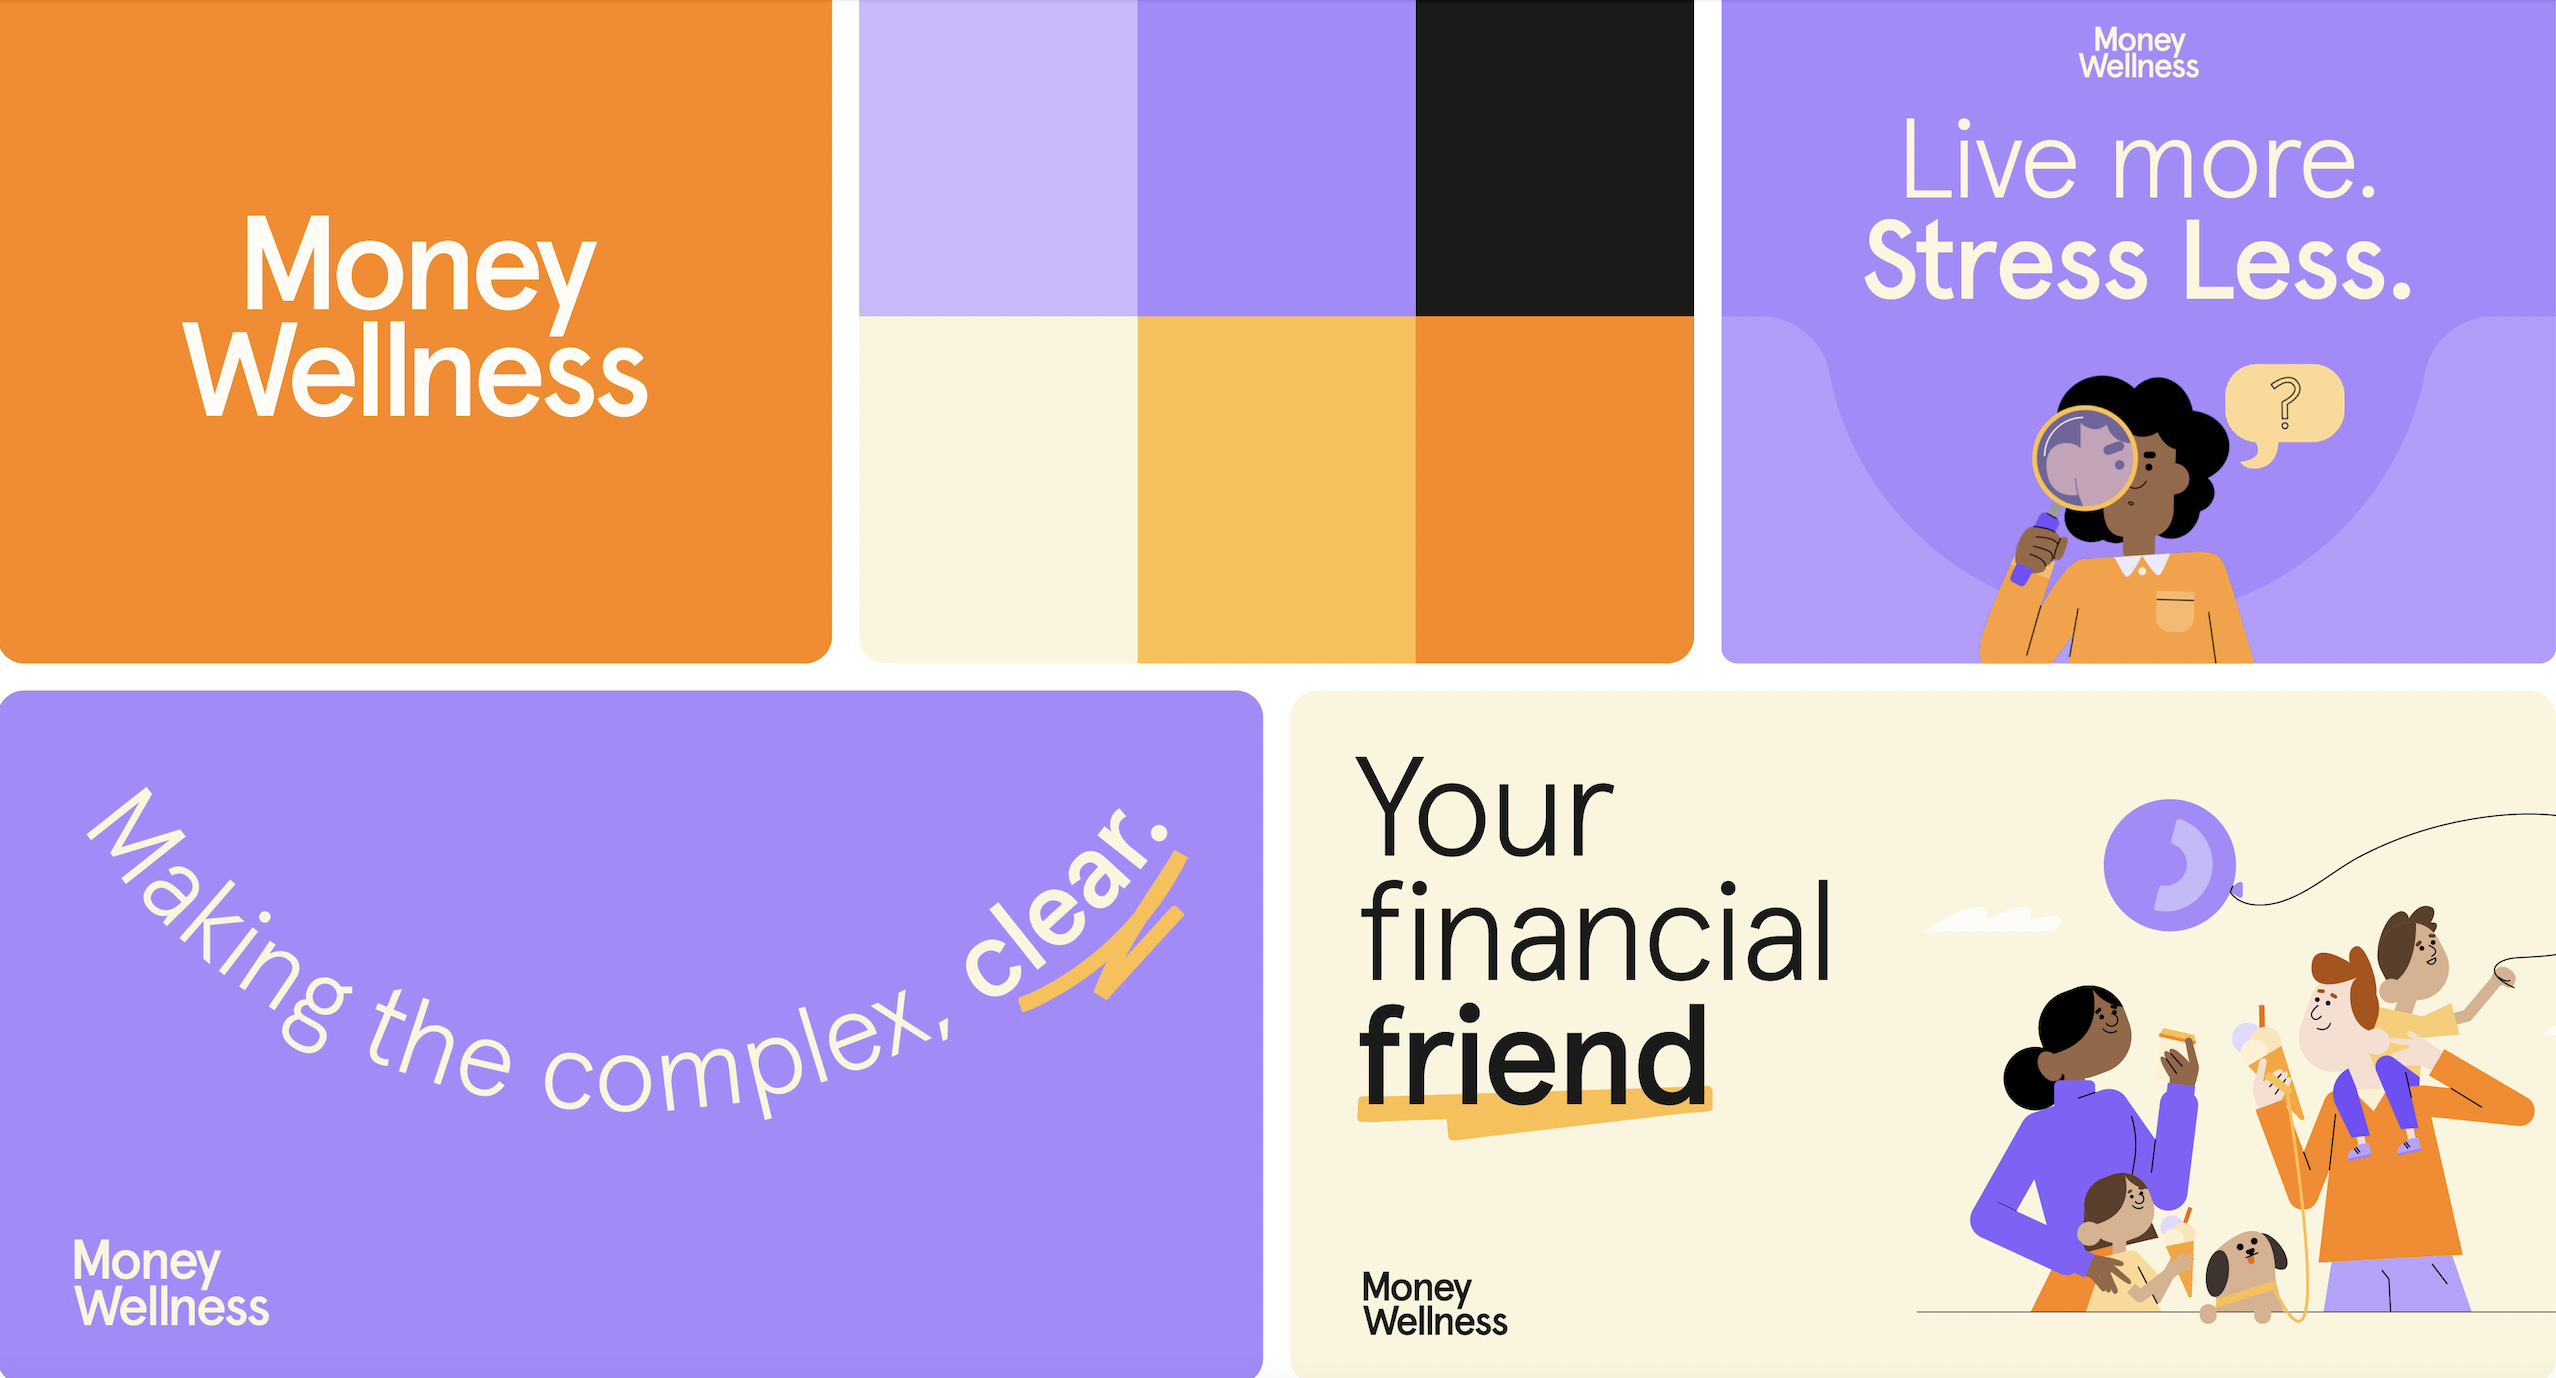 Flow Creative rebrand Money Wellness to enable thousands of people find financial security